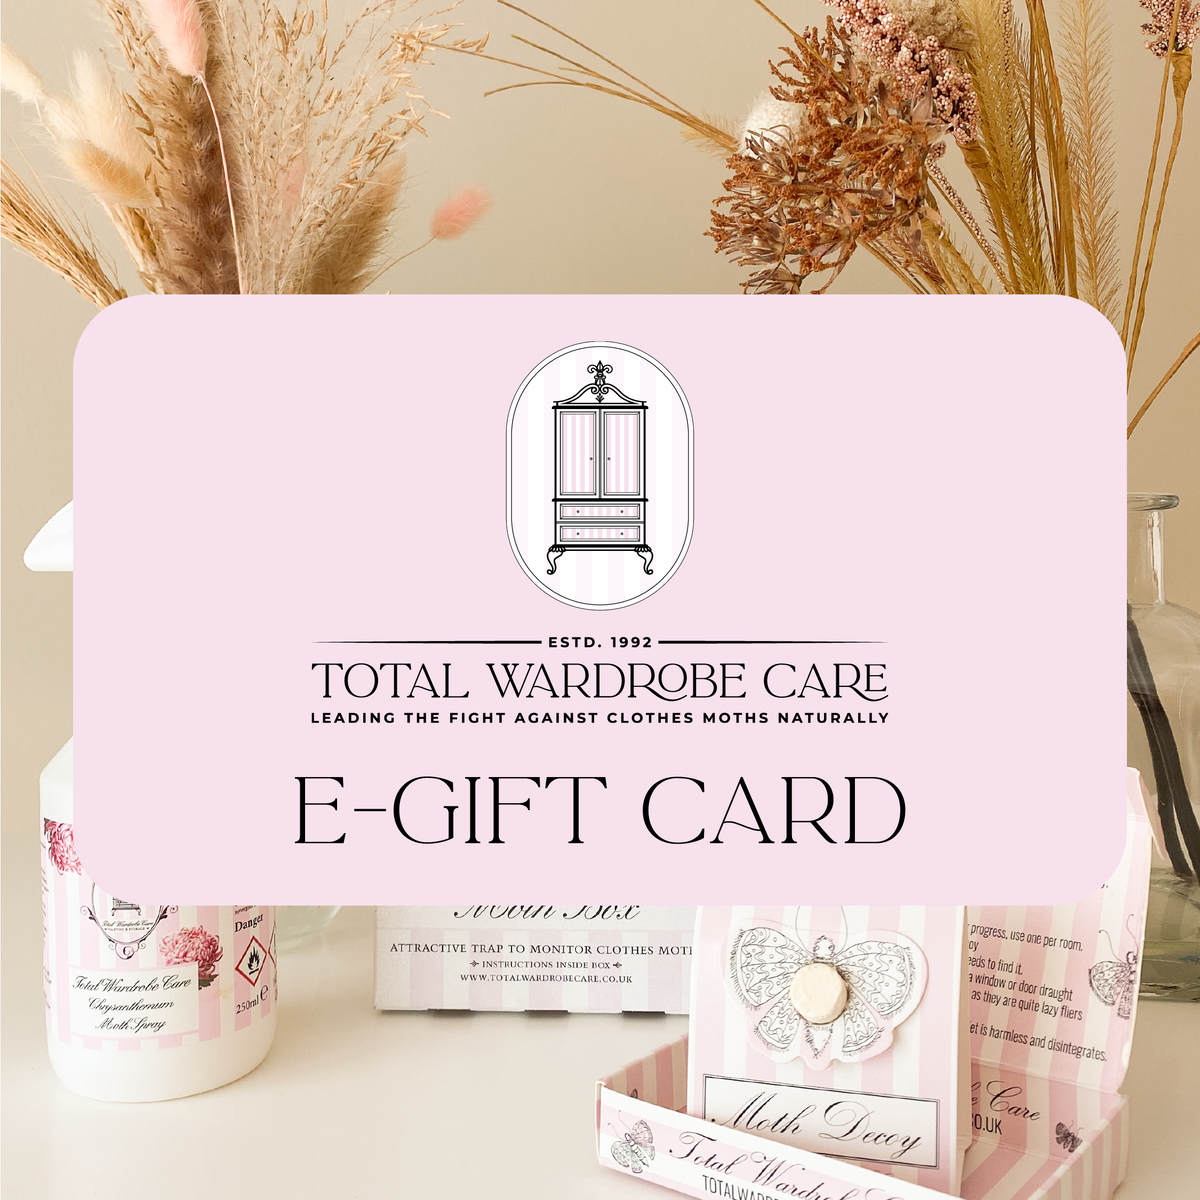 Pink e-gift card banner over image of Total Wardrobe Care products